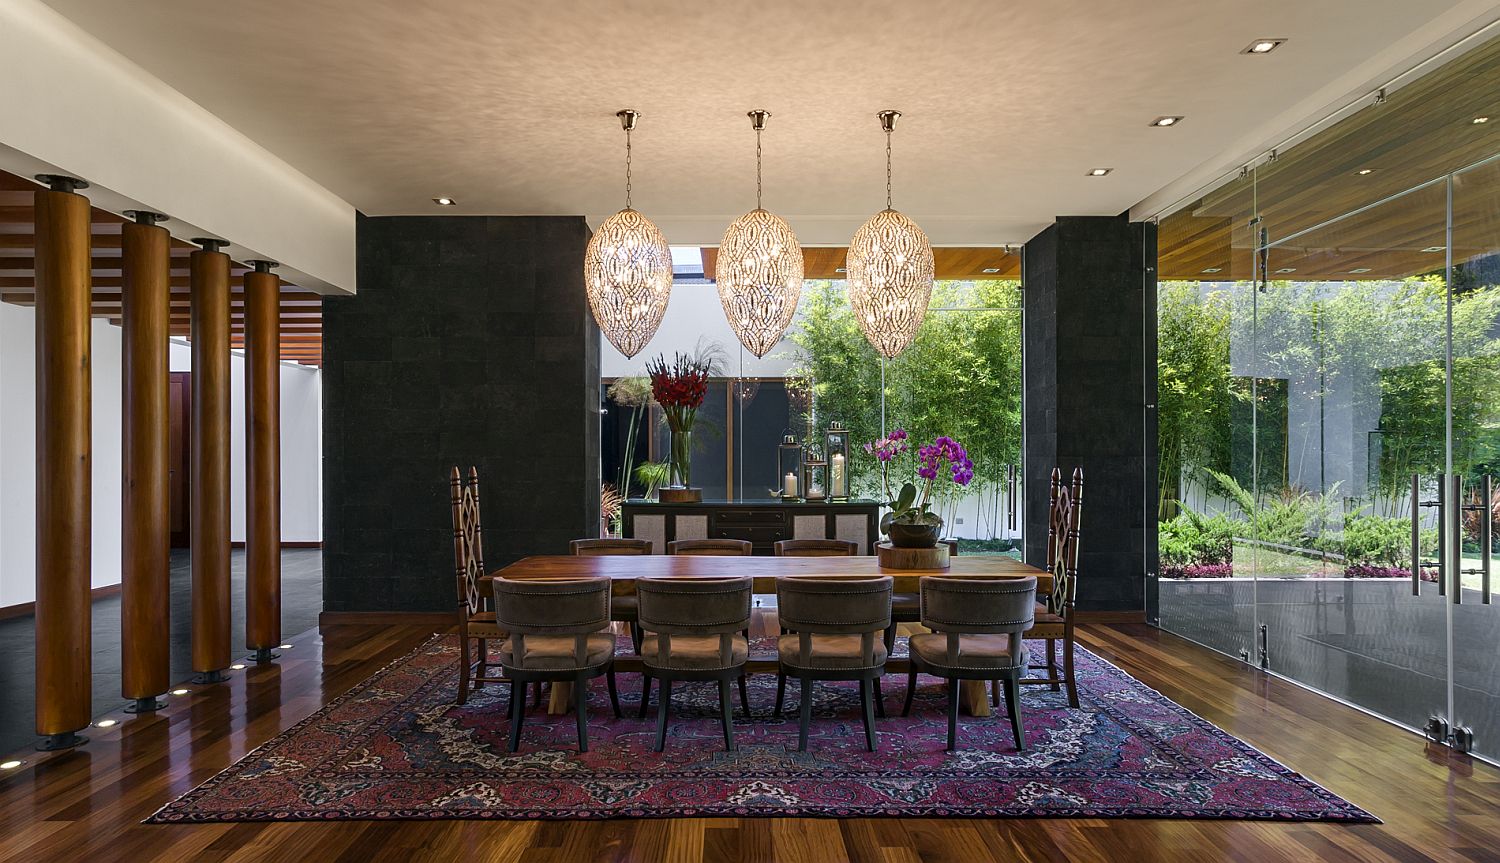 Exquisite modern dinig room with captivating light fixtures